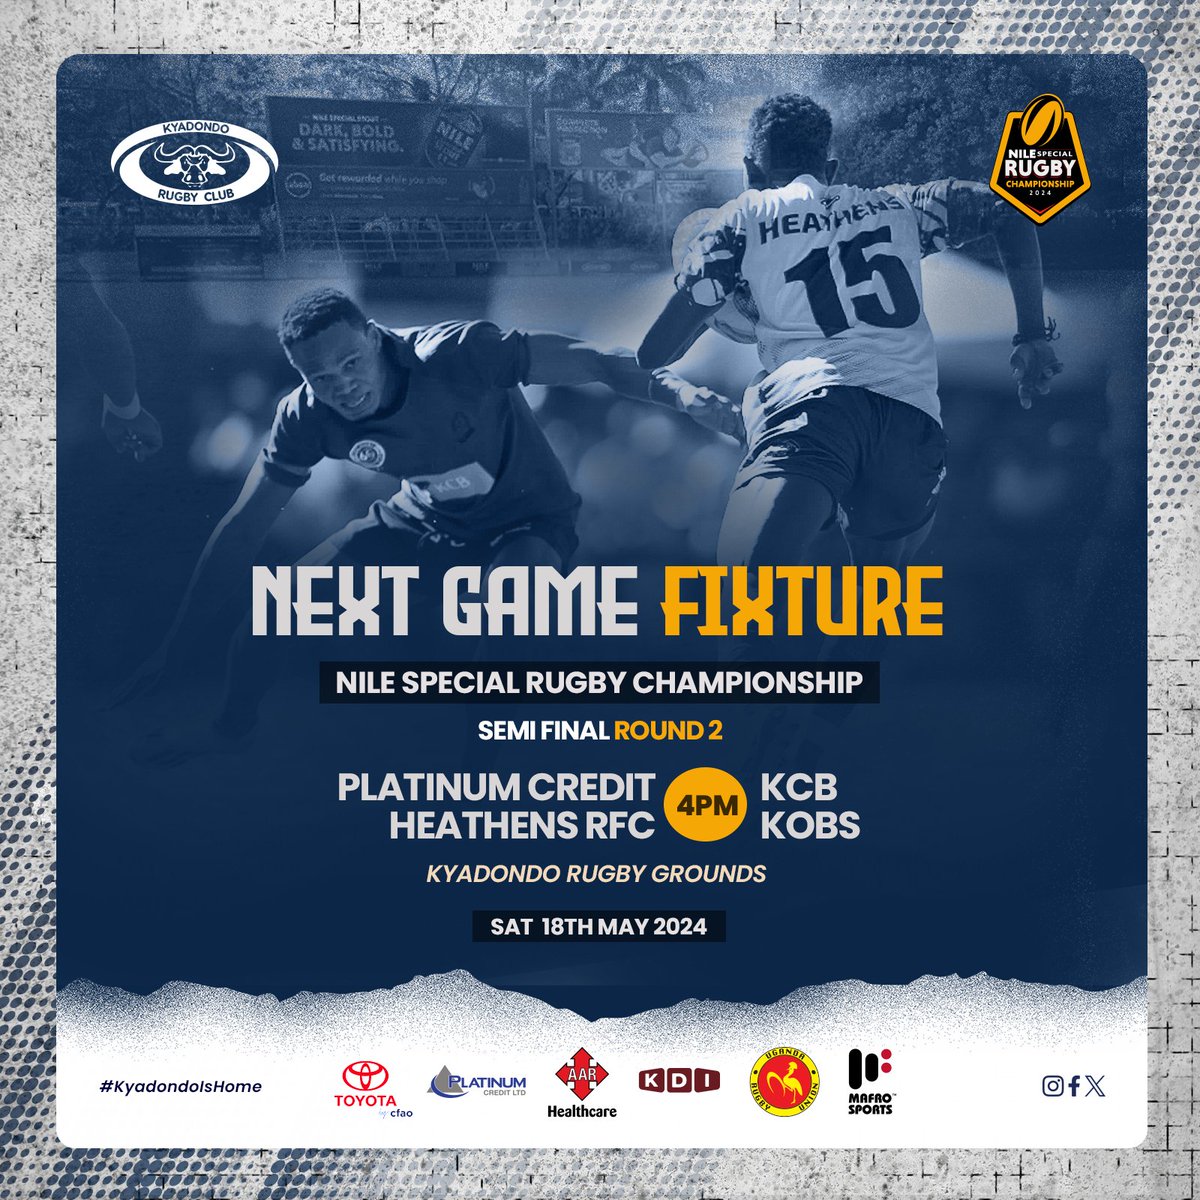 🏉 𝐒𝐀𝐓𝐔𝐑𝐃𝐀𝐘 𝐅𝐈𝐗𝐓𝐔𝐑𝐄 𝐀𝐋𝐄𝐑𝐓!

Be ready for an epic Saturday evening as @HeathensRFC hosts @KobsrugbyUg in the second round of the #NileSpecialRugby in quest of booking a slot into the Finals.
🎫 10𝒌
🕛𝑮𝒂𝒕𝒆𝒔 𝒐𝒑𝒆𝒏 𝒂𝒕 12𝑵𝑶𝑶𝑵

#KyadondoIsHome